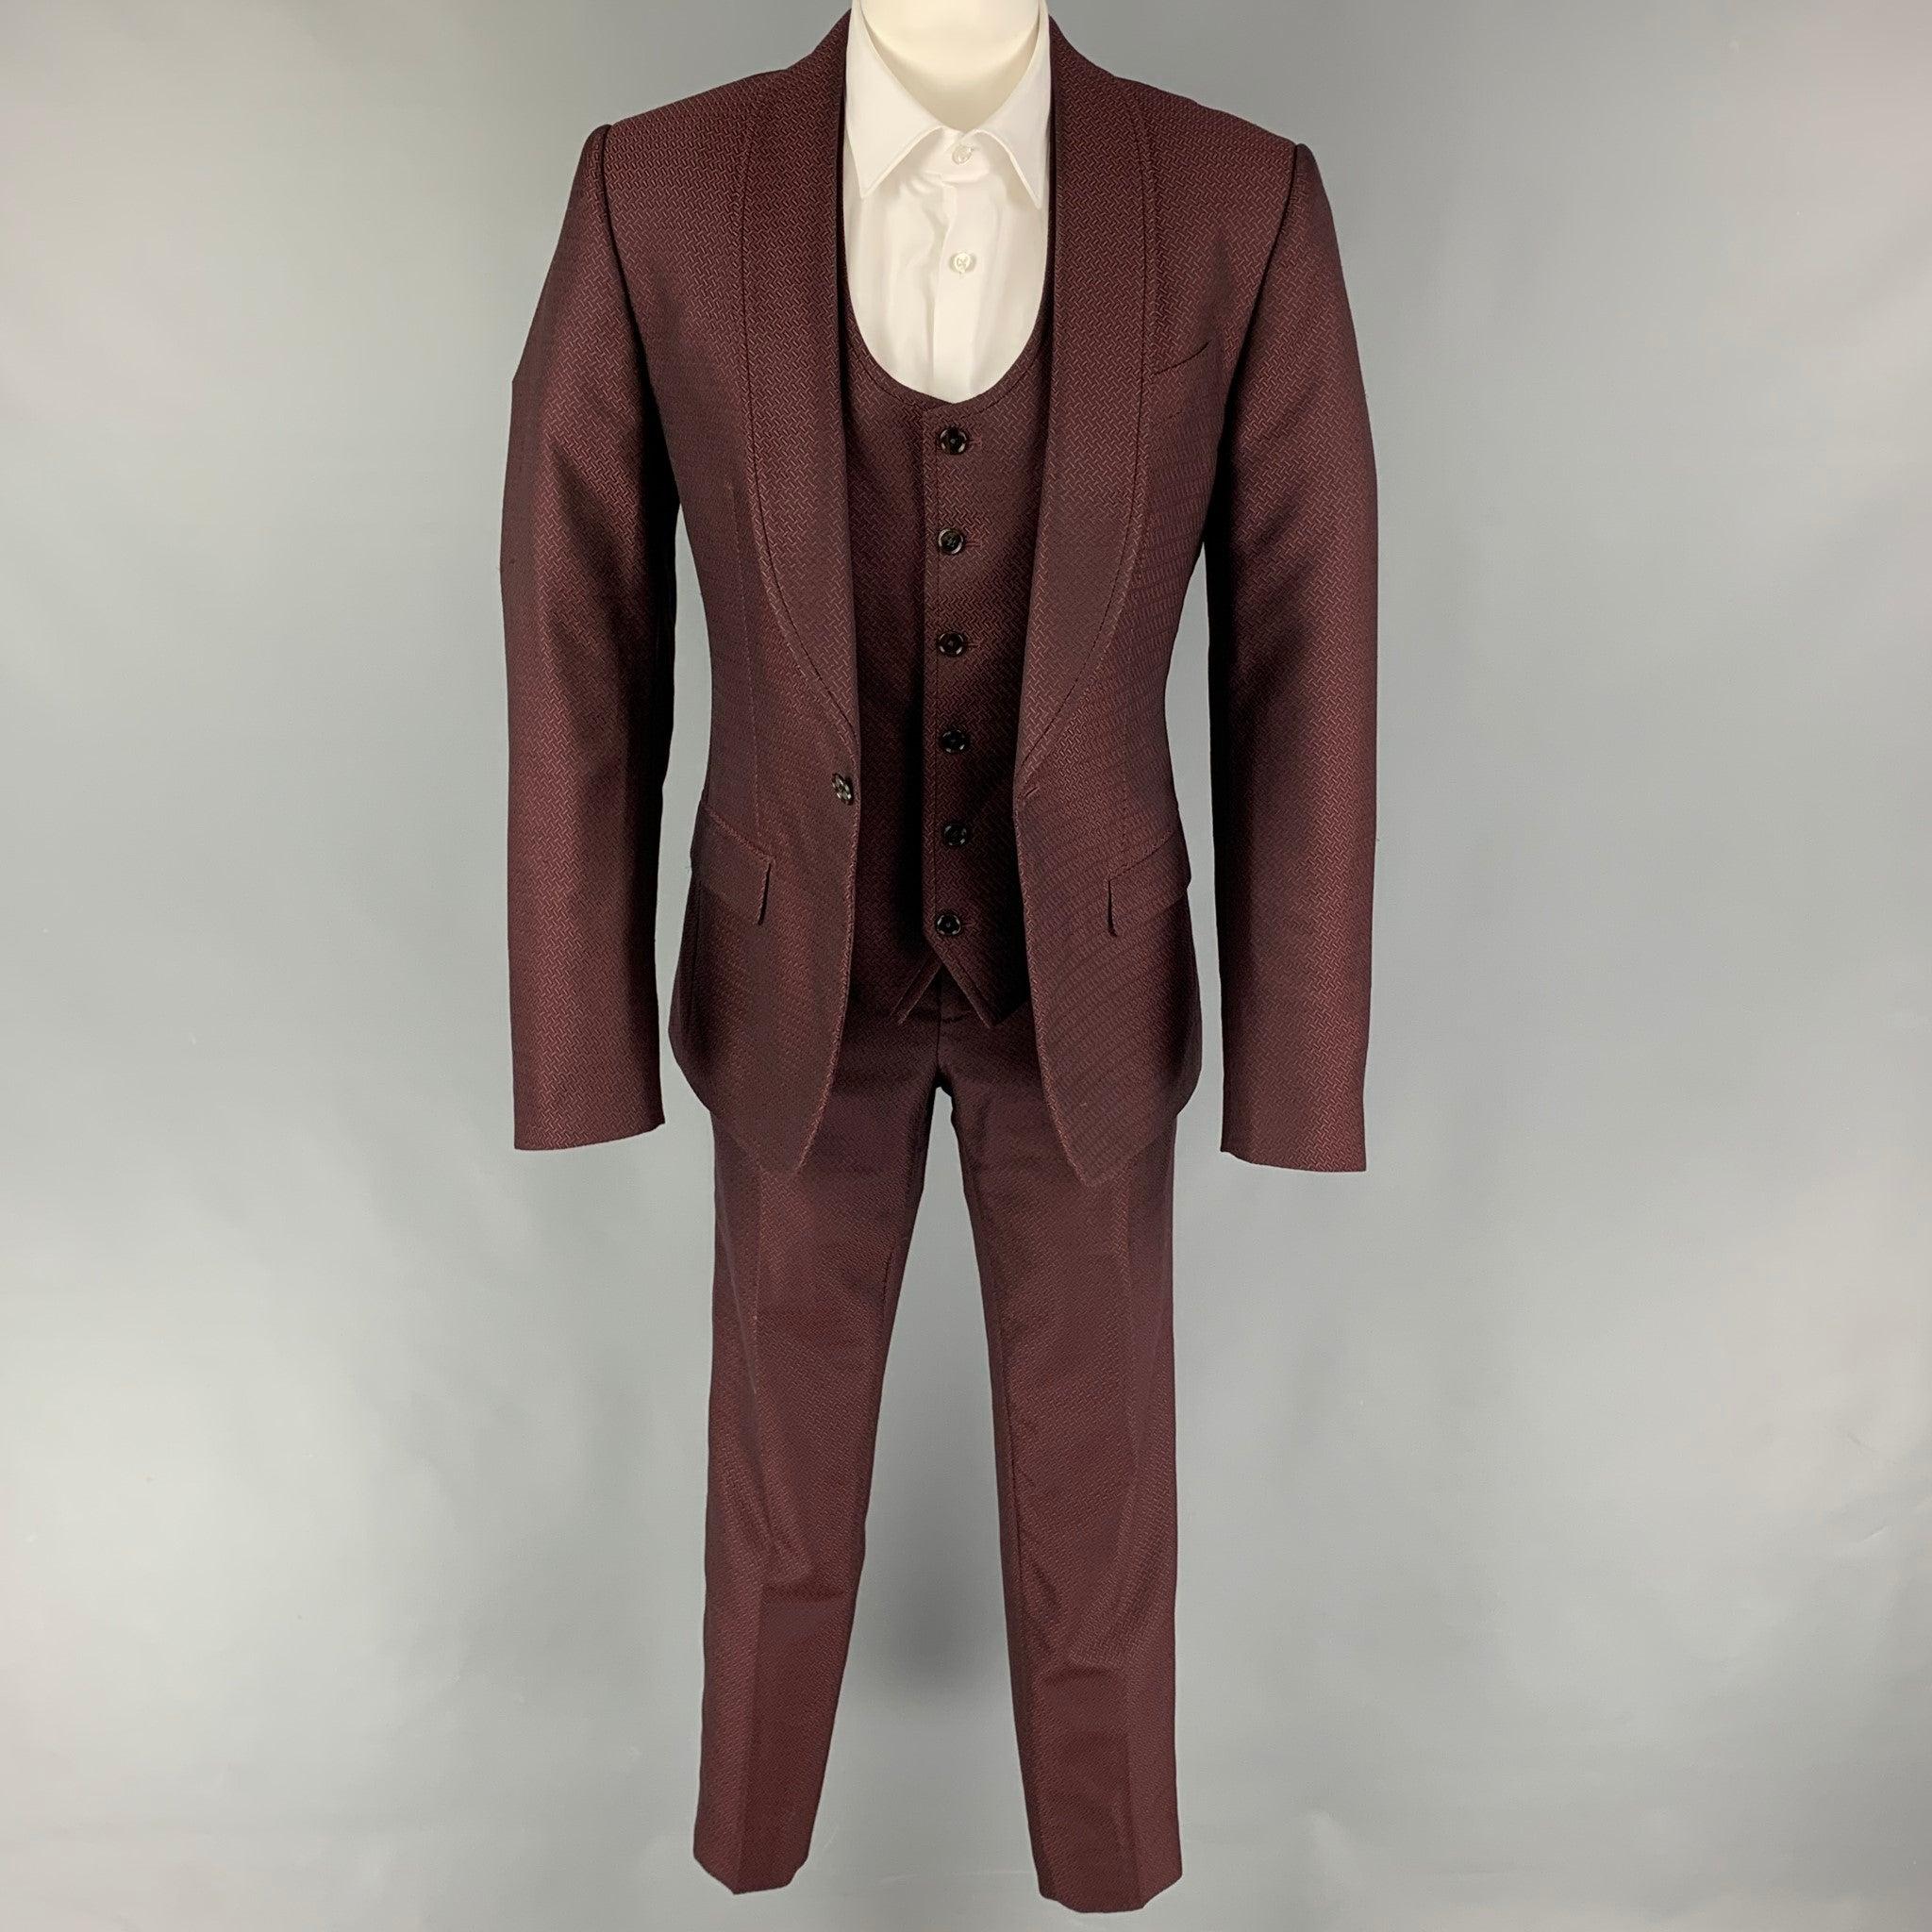 DOLCE & GABBANA Size 36 Burgundy Jacquard Wool Silk Shawl Collar 3 Piece Suit In Excellent Condition For Sale In San Francisco, CA